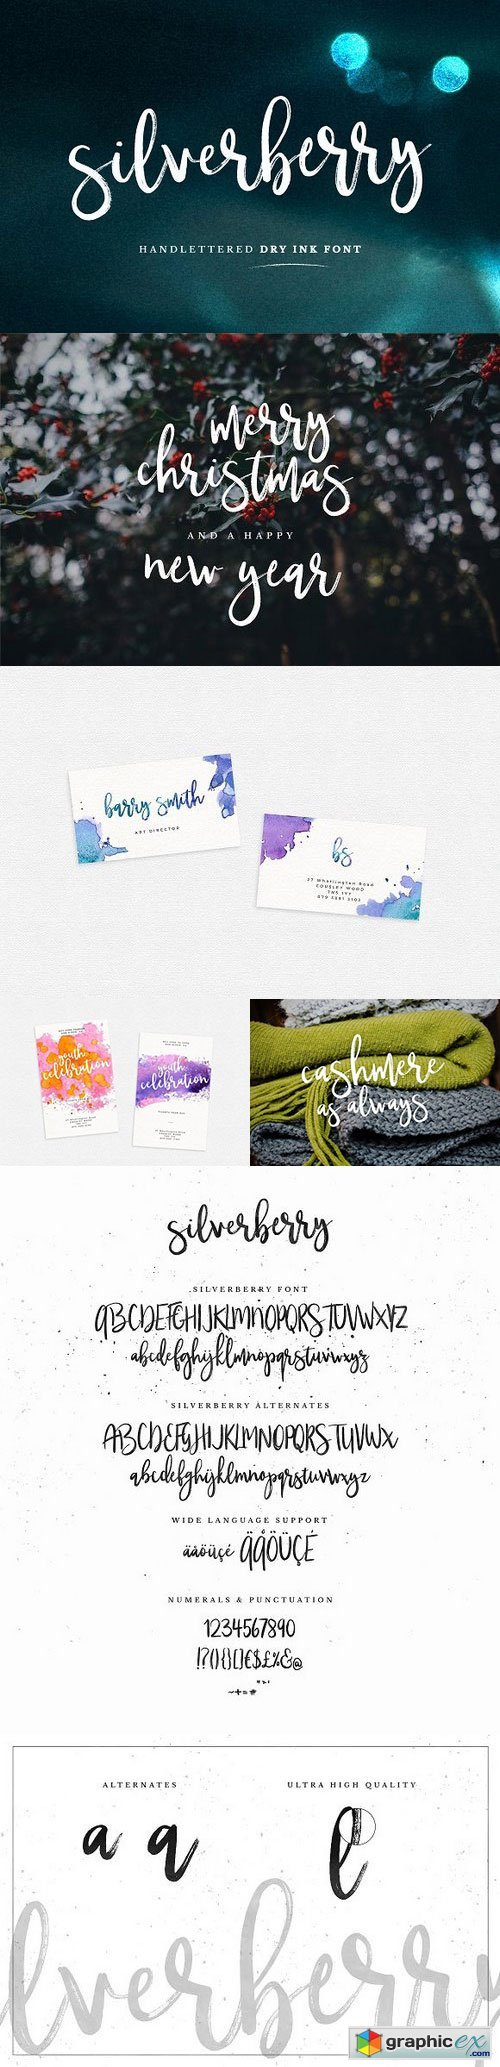 Silverberry - Dry Ink Font